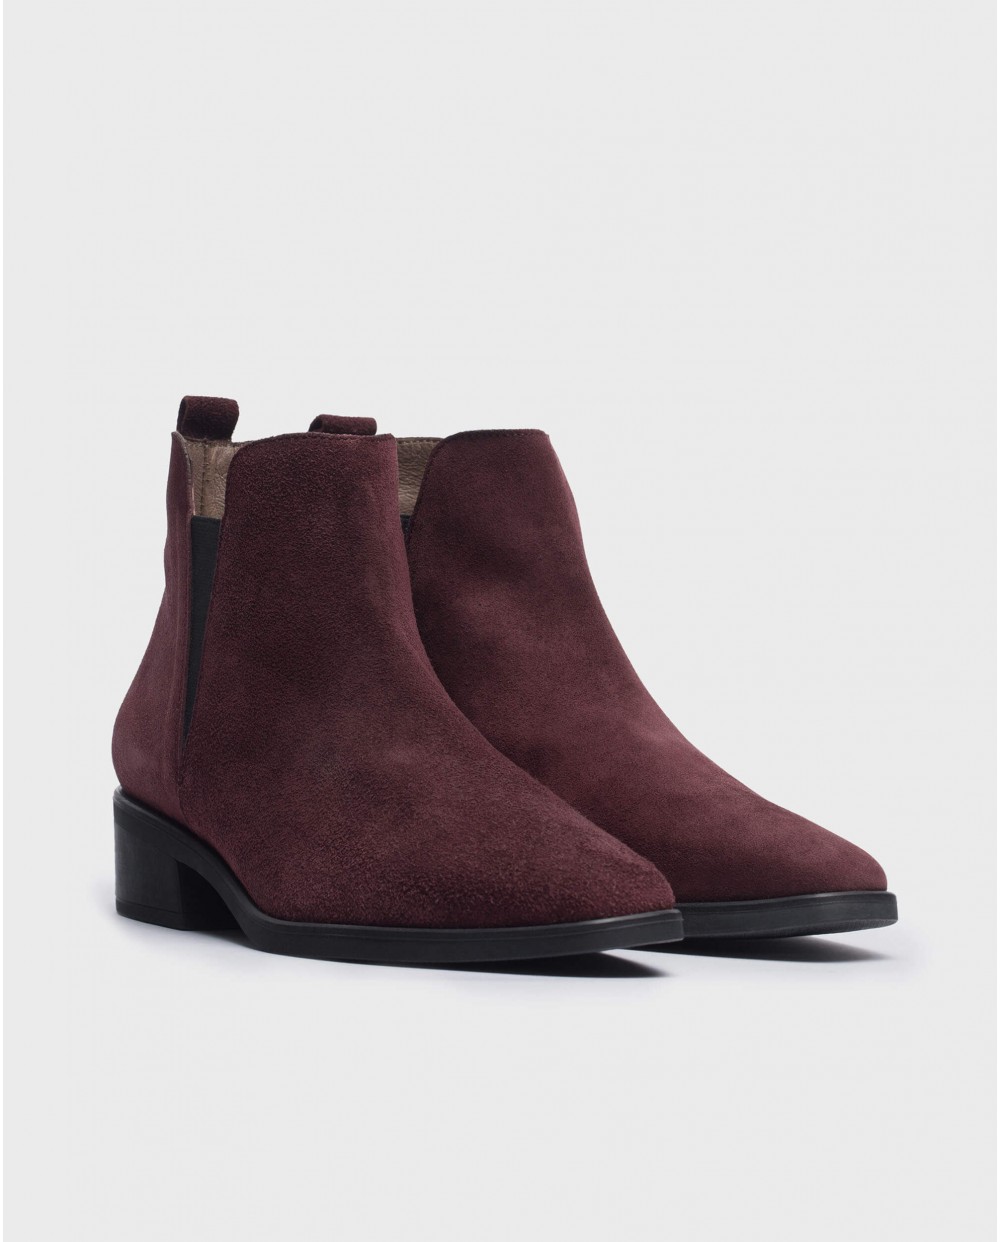 Wonders-Ankle Boots-Suede red ankle boot